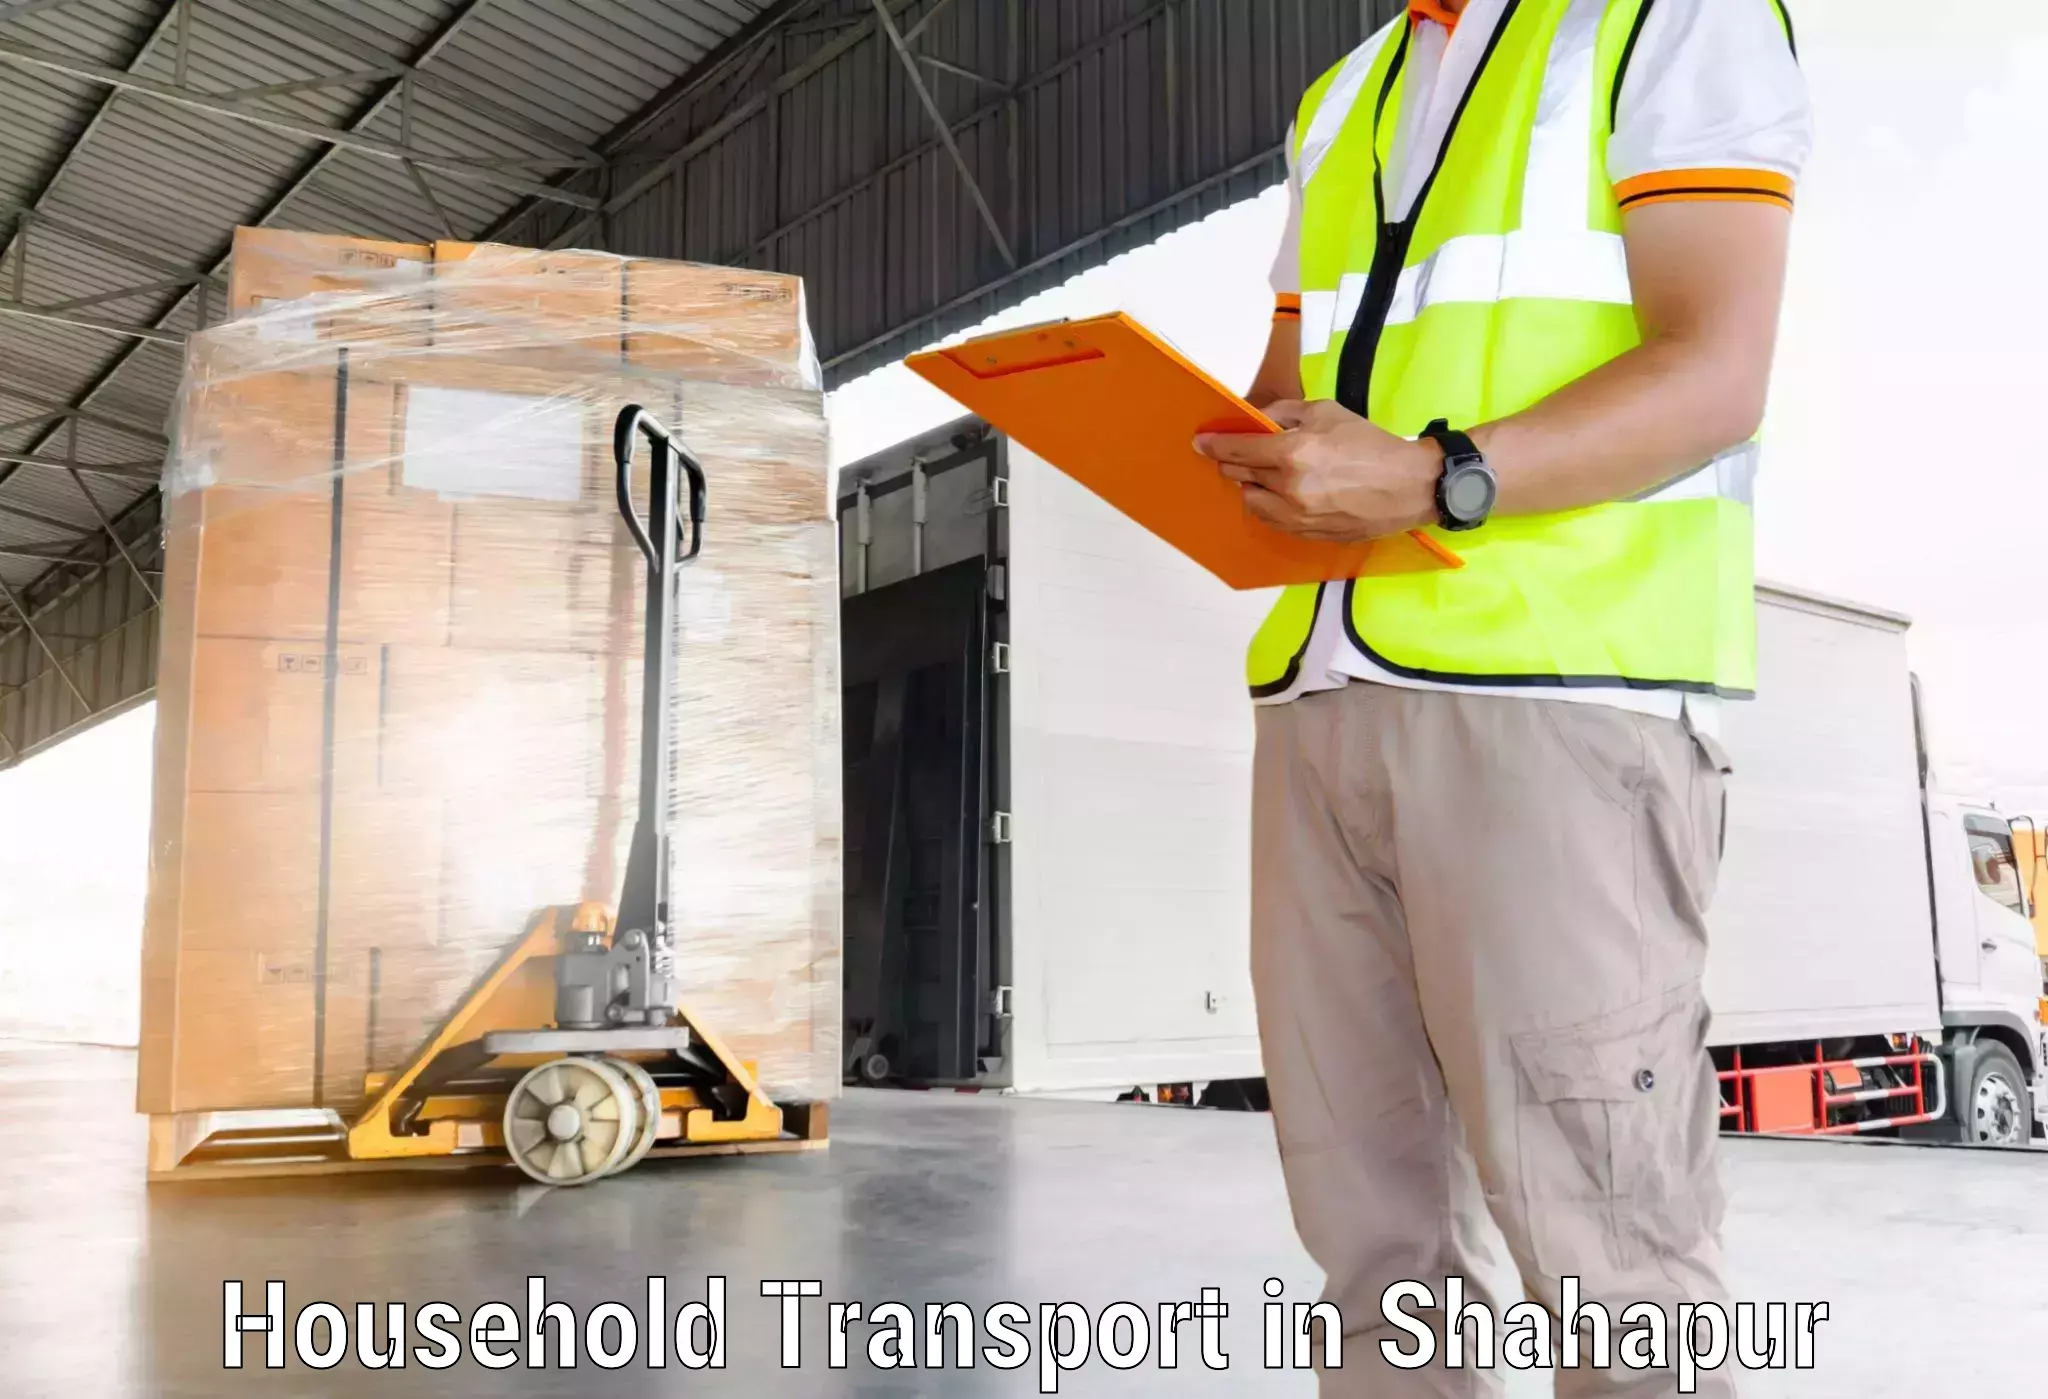 Furniture moving assistance in Shahapur